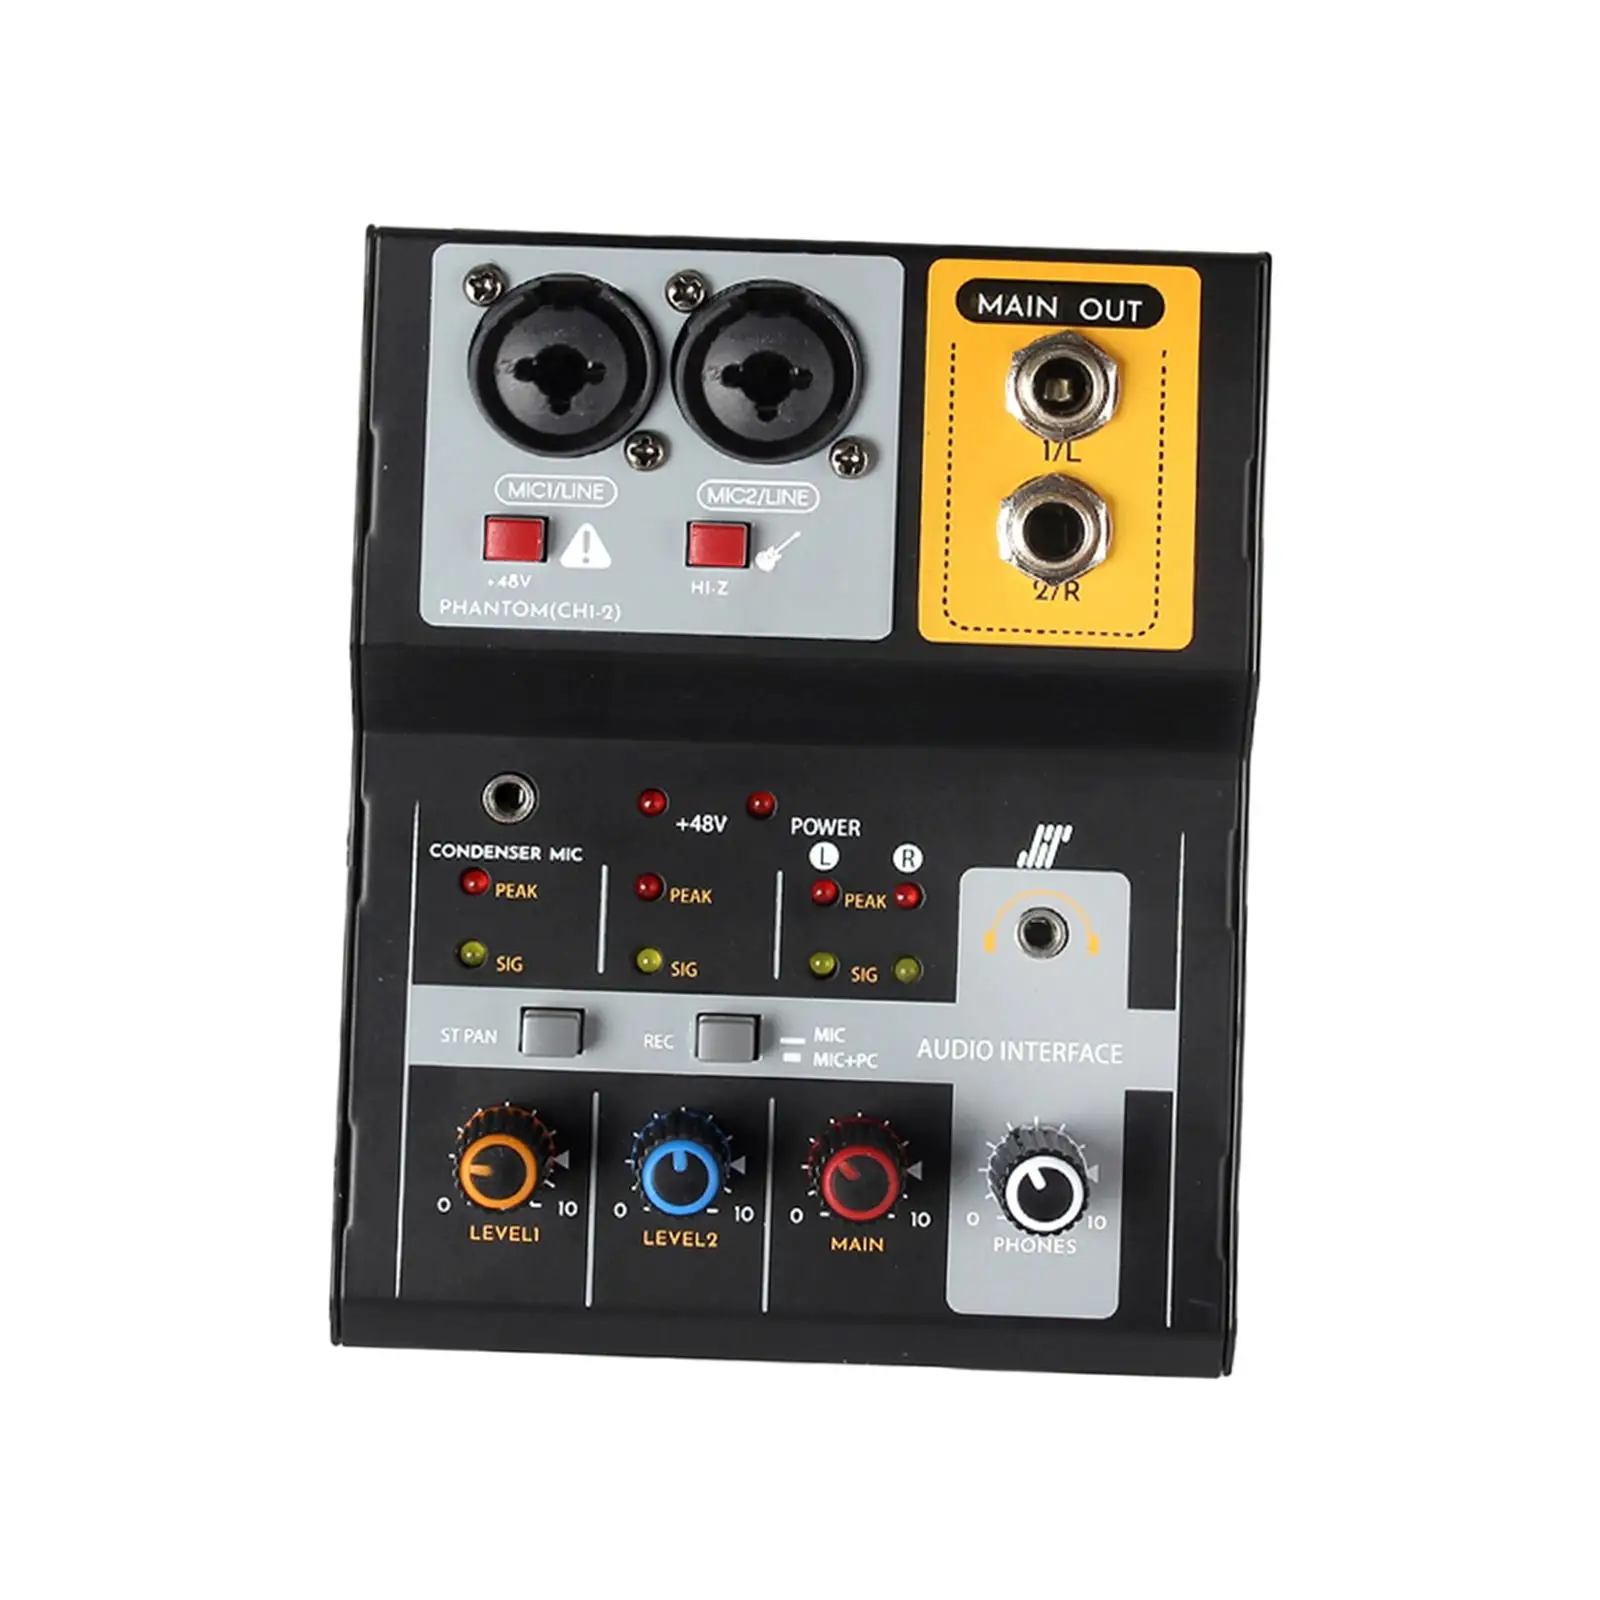 Audio Mixer Controller USB Compact Portable Stereo 2 Channel Audio Sound Mixer for Live Show Stereo Recording Podcasting